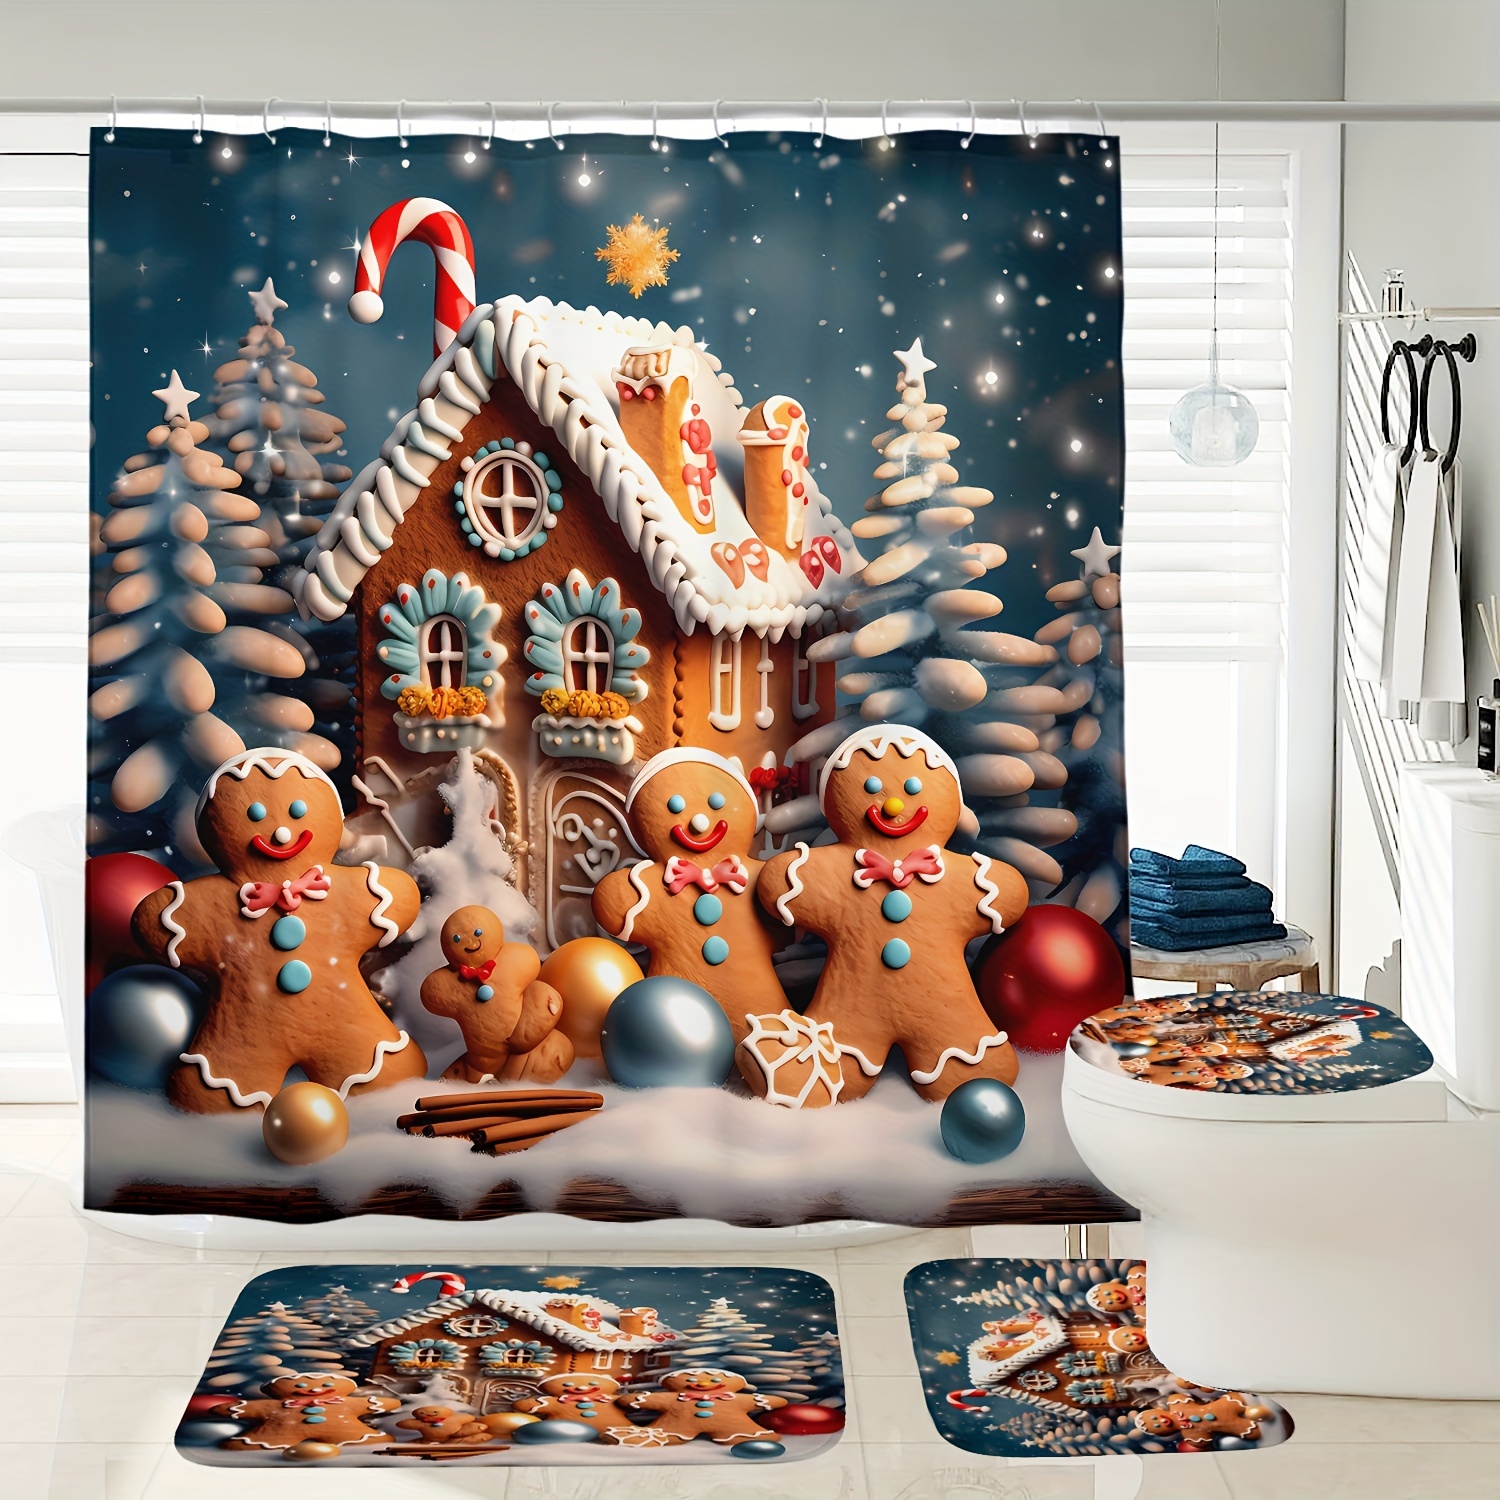 

Festive Christmas Gingerbread House Shower Curtain Set With Toilet Seat Cover And Bath Mats - 72" X 72" - Waterproof, Durable, And Decorative For Your Modern Bathroom